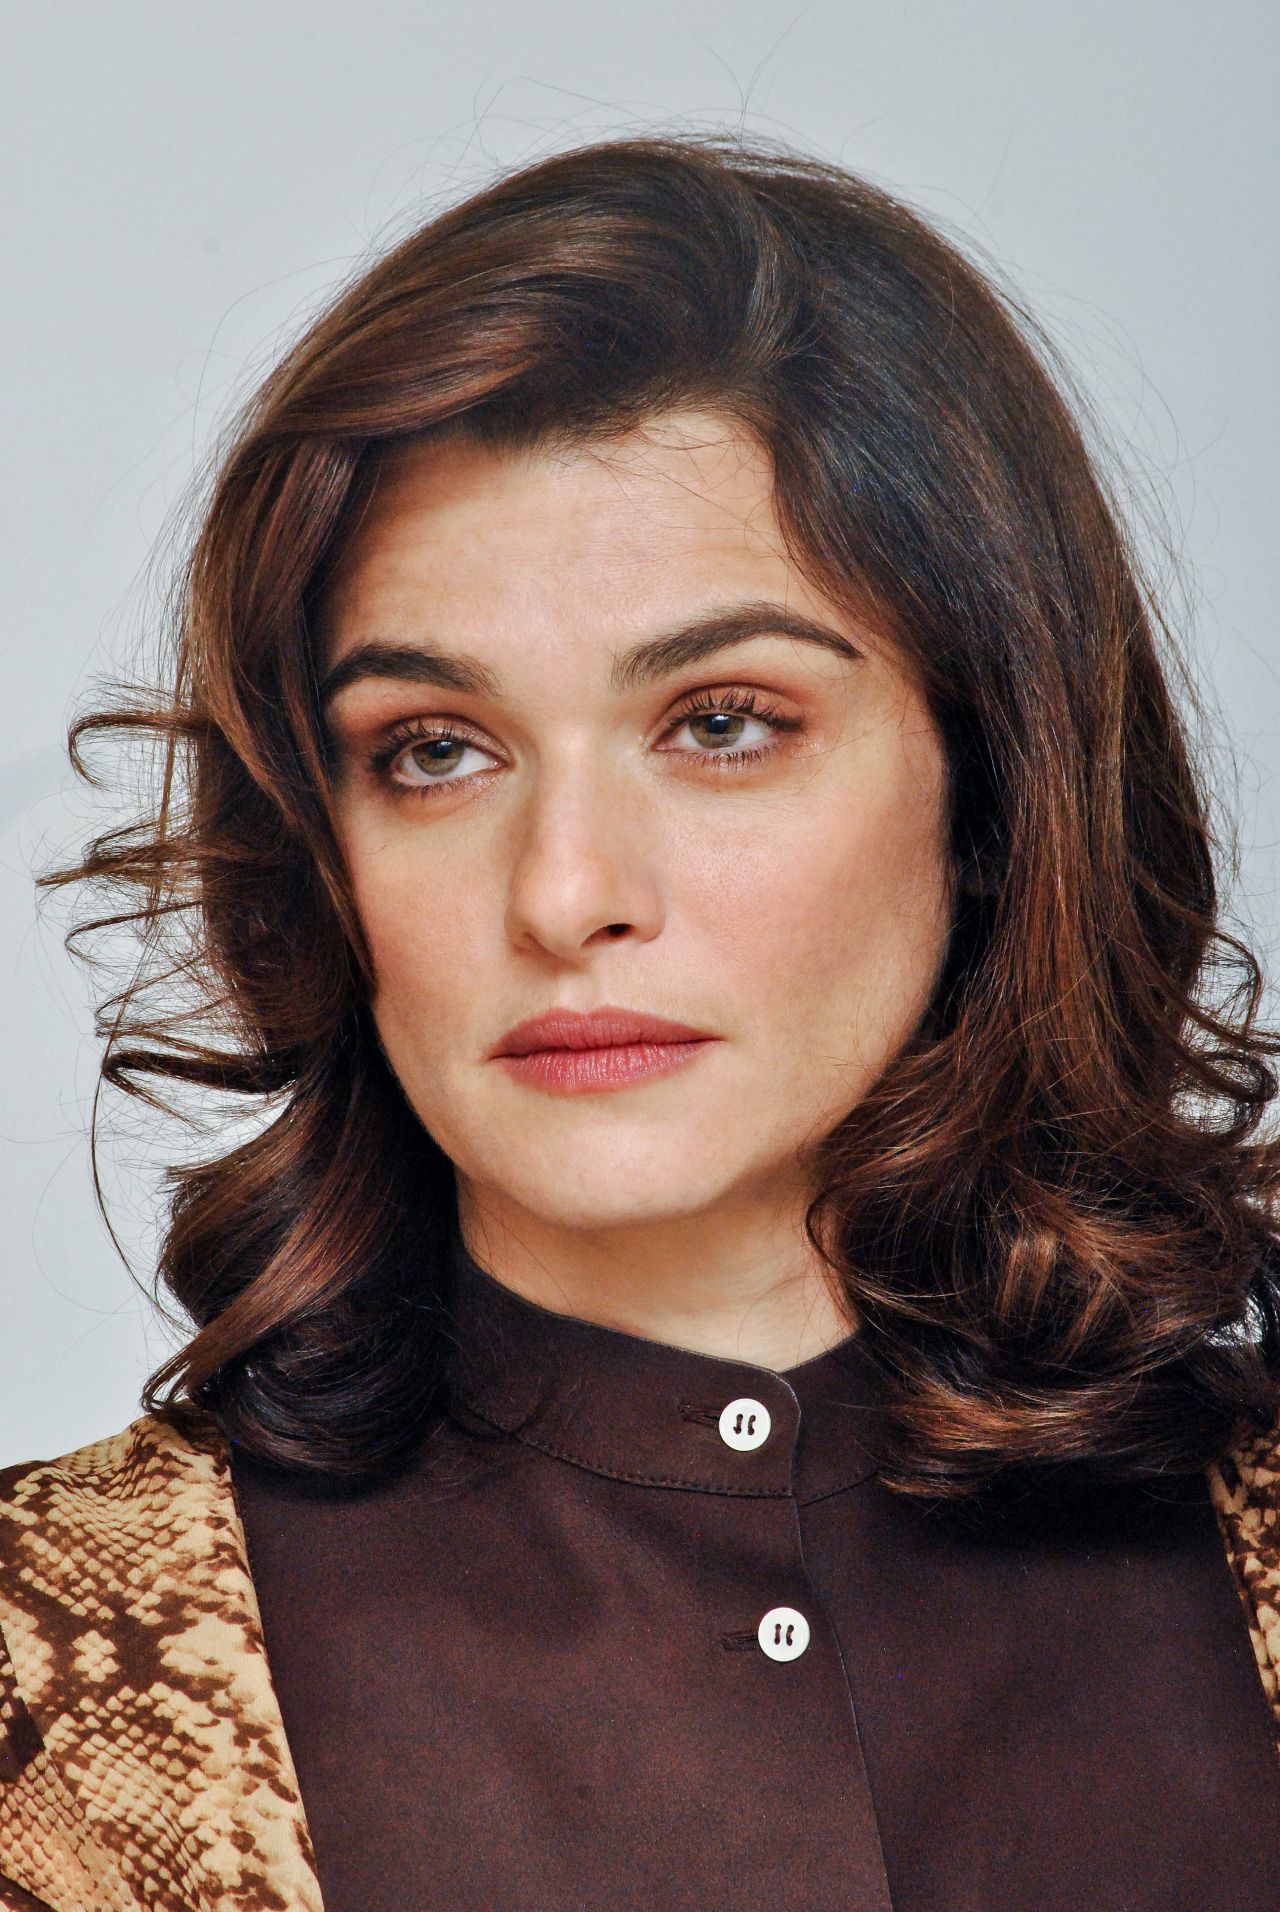 rachel-weisz-youth-press-conference-portraits-in-los-angeles_7.